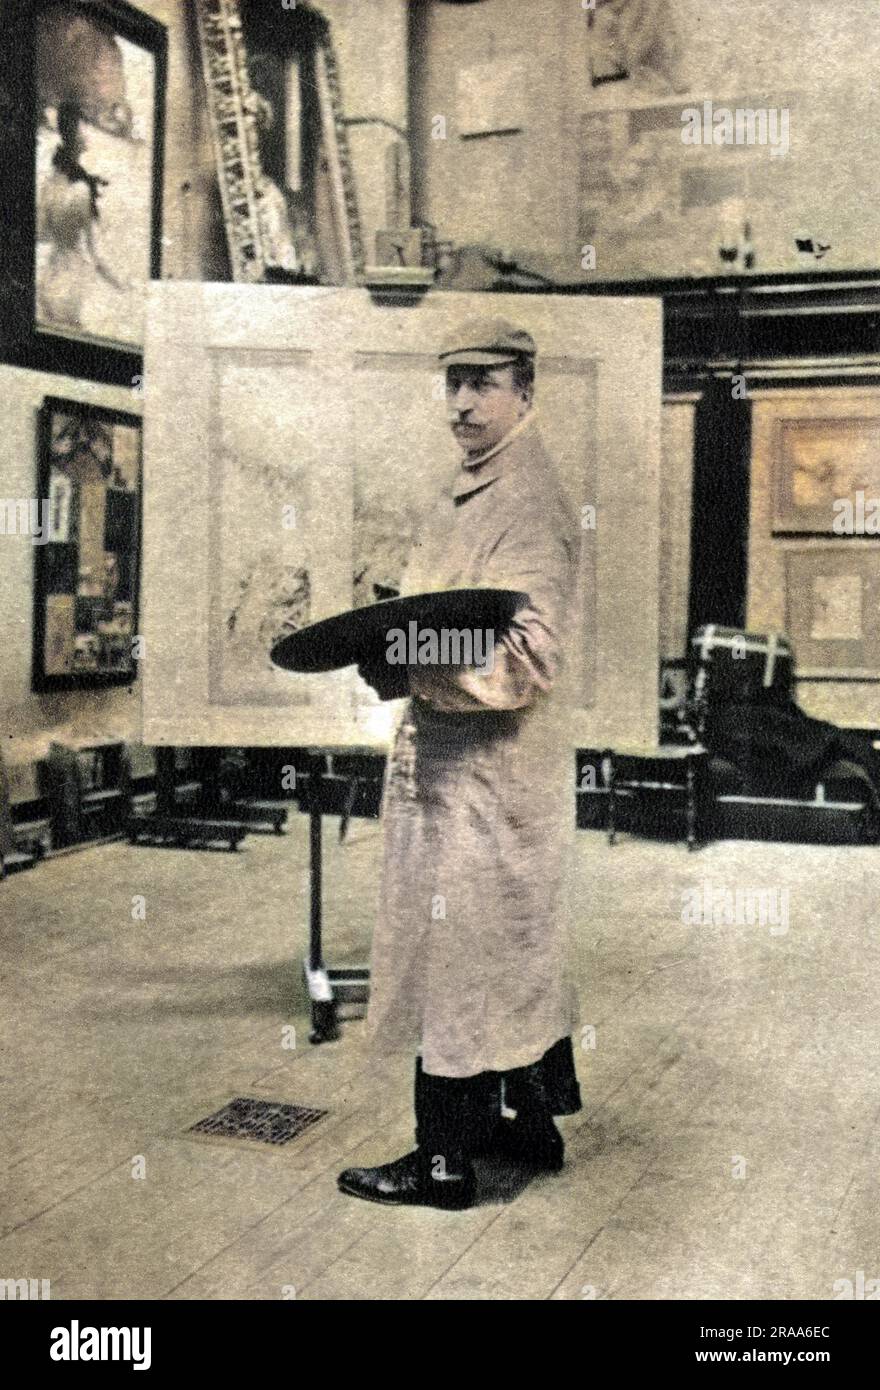 EDOUARD DETAILLE (1848 - 1912), French artist, noted for his military scenes : photographed at work.     Date: 1898 Stock Photo